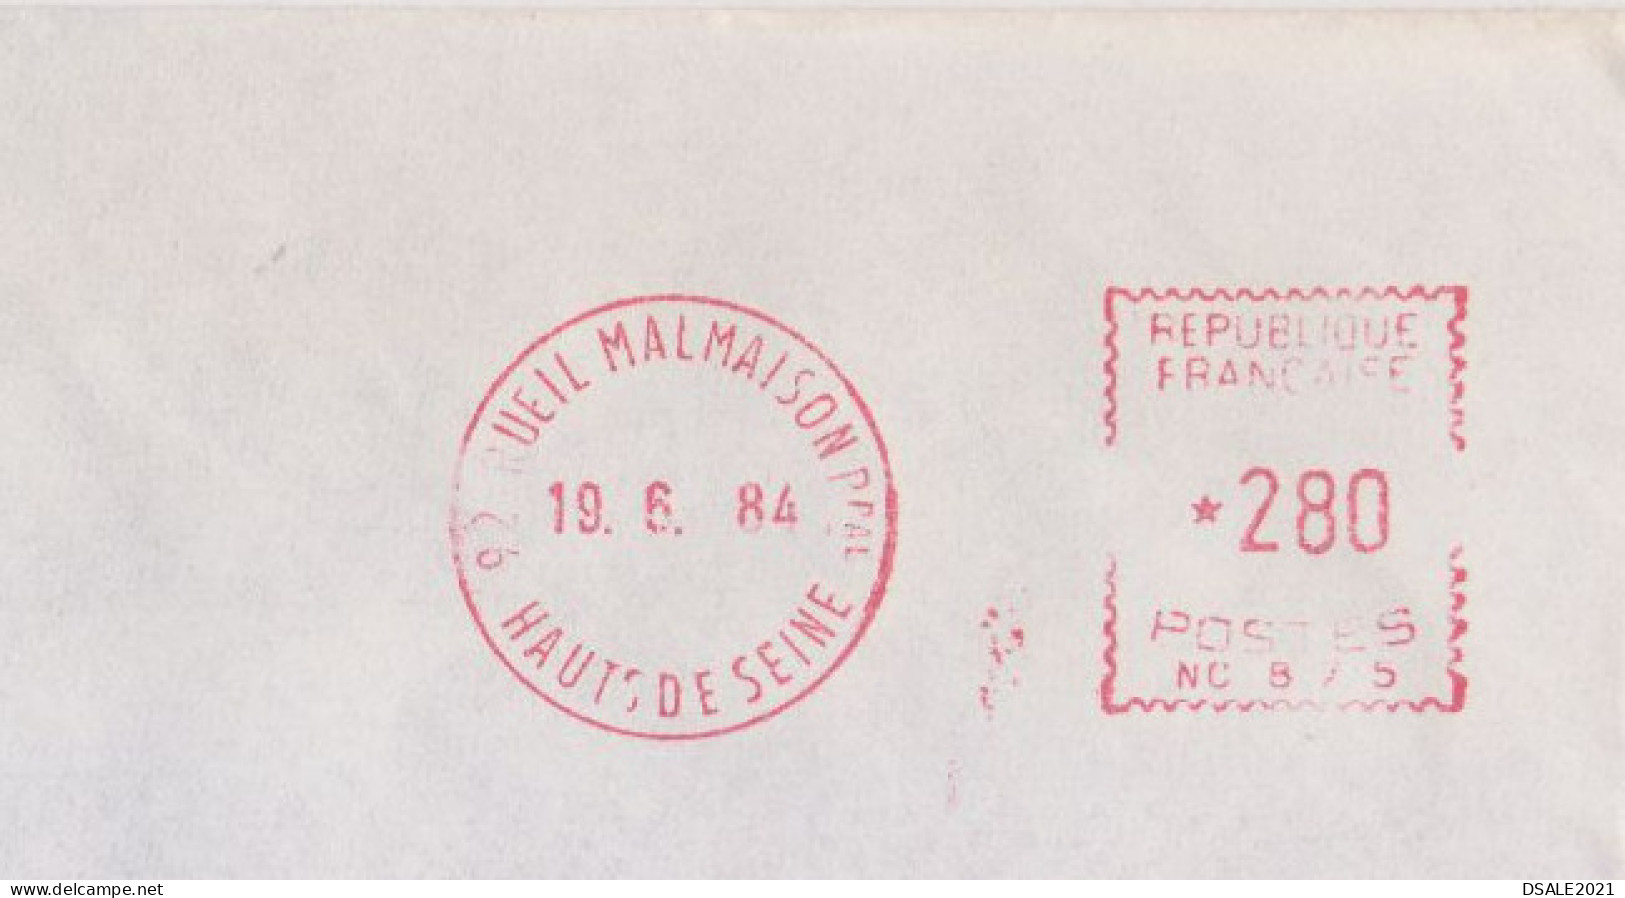 France 1984 Airmail Window Cover With Advertising Machine EMA METER Stamp Cachet, Sent Abroad (66862) - Briefe U. Dokumente